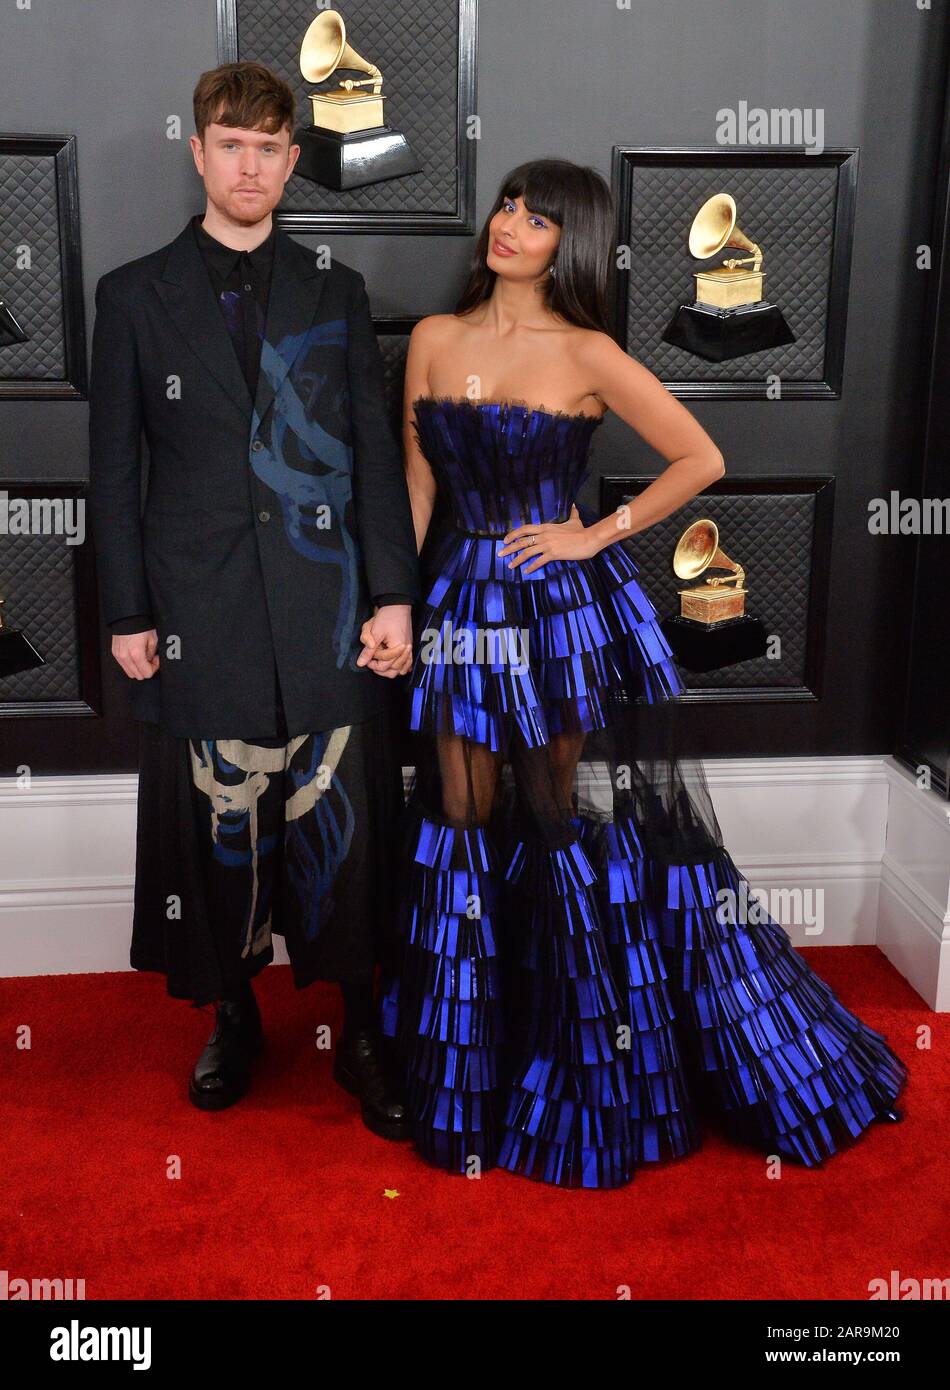 Los Angeles, USA. 26th Jan 2020. (L-R) James Blake and Jameela Jamil arrive for the 62nd annual Grammy Awards held at Staples Center in Los Angeles on Sunday, January 26, 2020. Photo by Jim Ruymen/UPI Credit: UPI/Alamy Live News Stock Photo